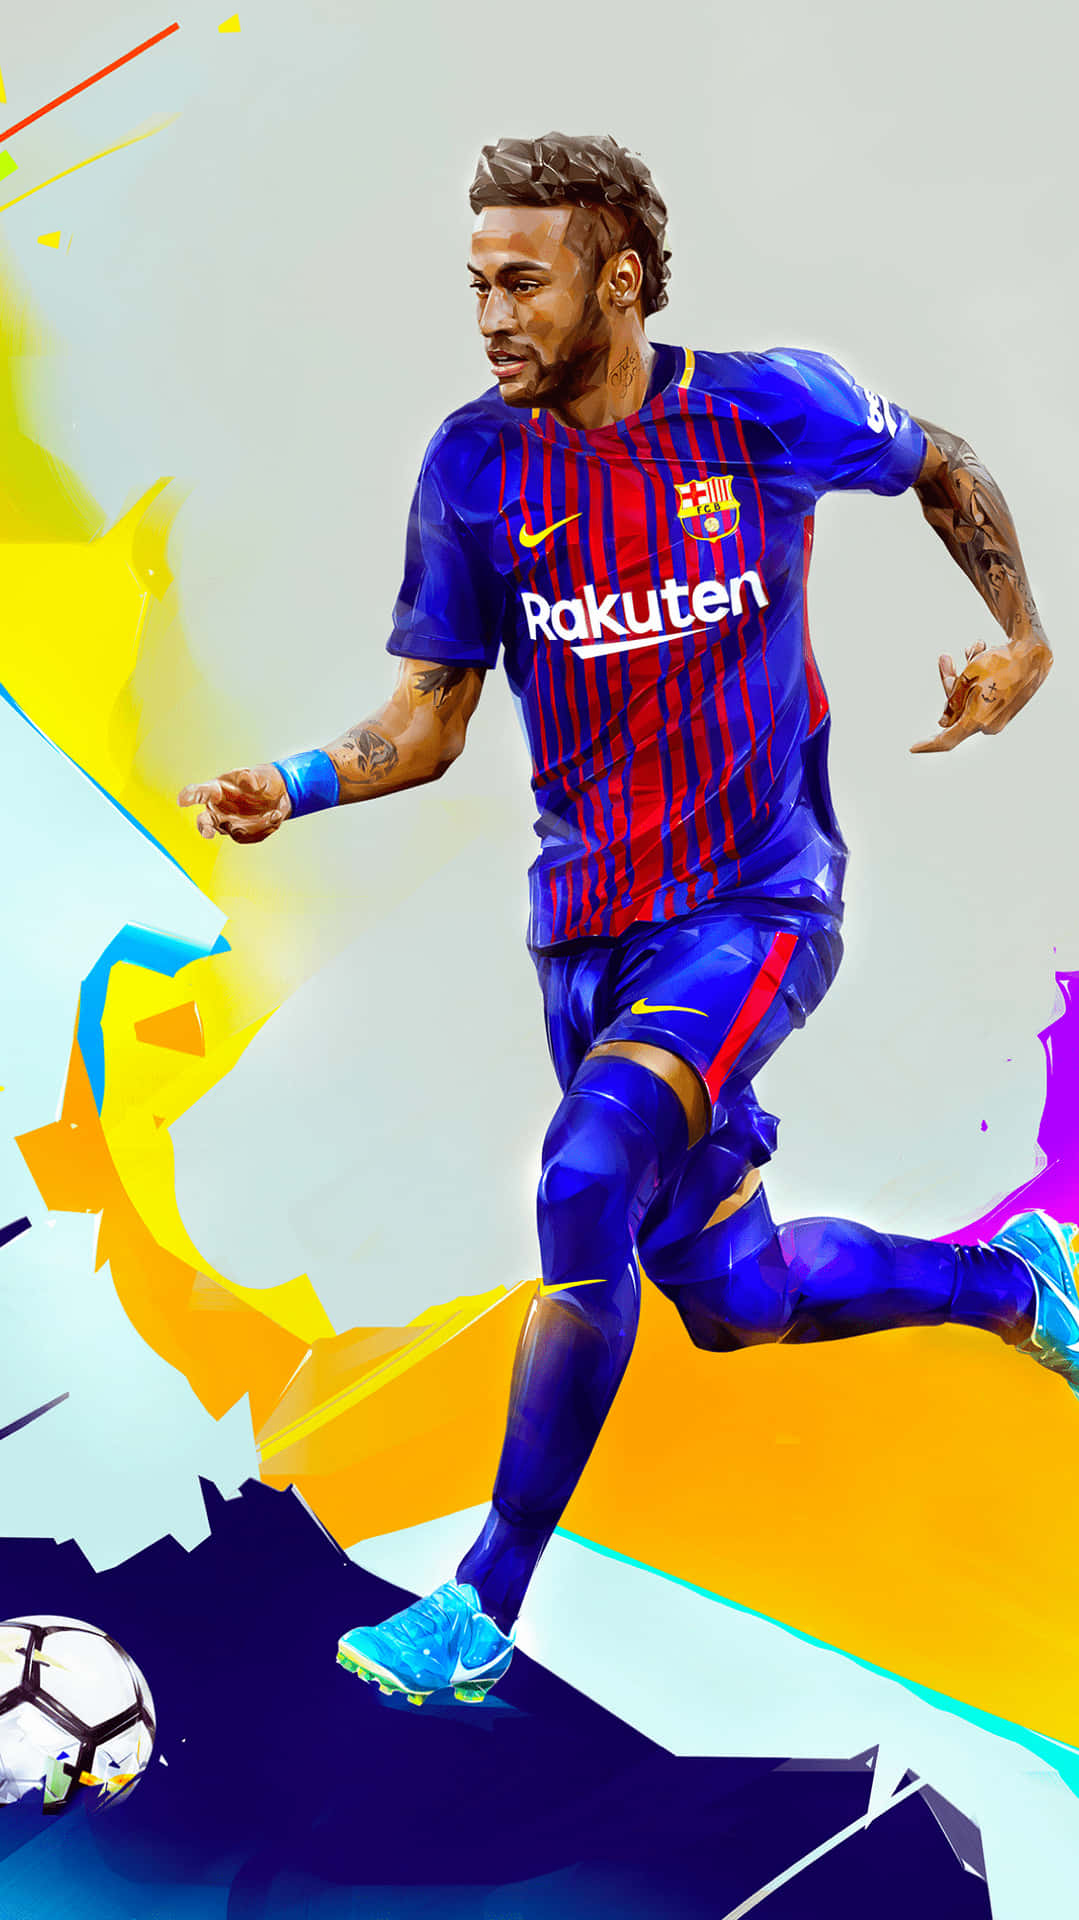 "Neymar with his new iPhone - Express yourself and conquer with style!" Wallpaper